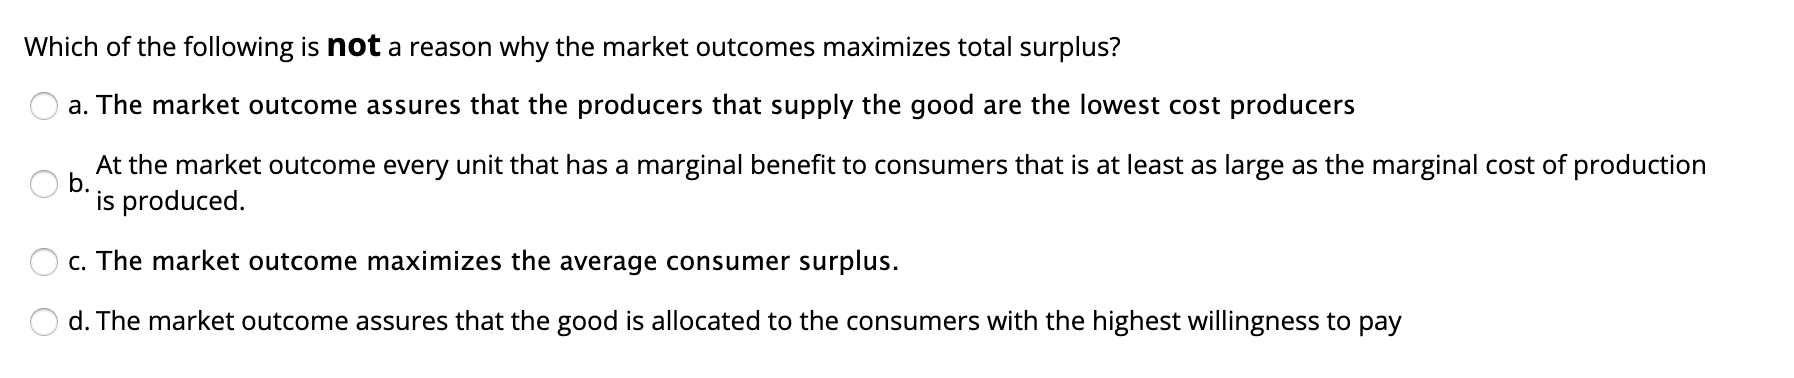 Which of the following is not a reason why the market outcomes maximizes total surplus?
a. The market outcome assures that the producers that supply the good are the lowest cost producers
At the market outcome every unit that has a marginal benefit to consumers that is at least as large as the marginal cost of production
b.
is produced.
c. The market outcome maximizes the average consumer surplus.
d. The market outcome assures that the good is allocated to the consumers with the highest willingness to pay
